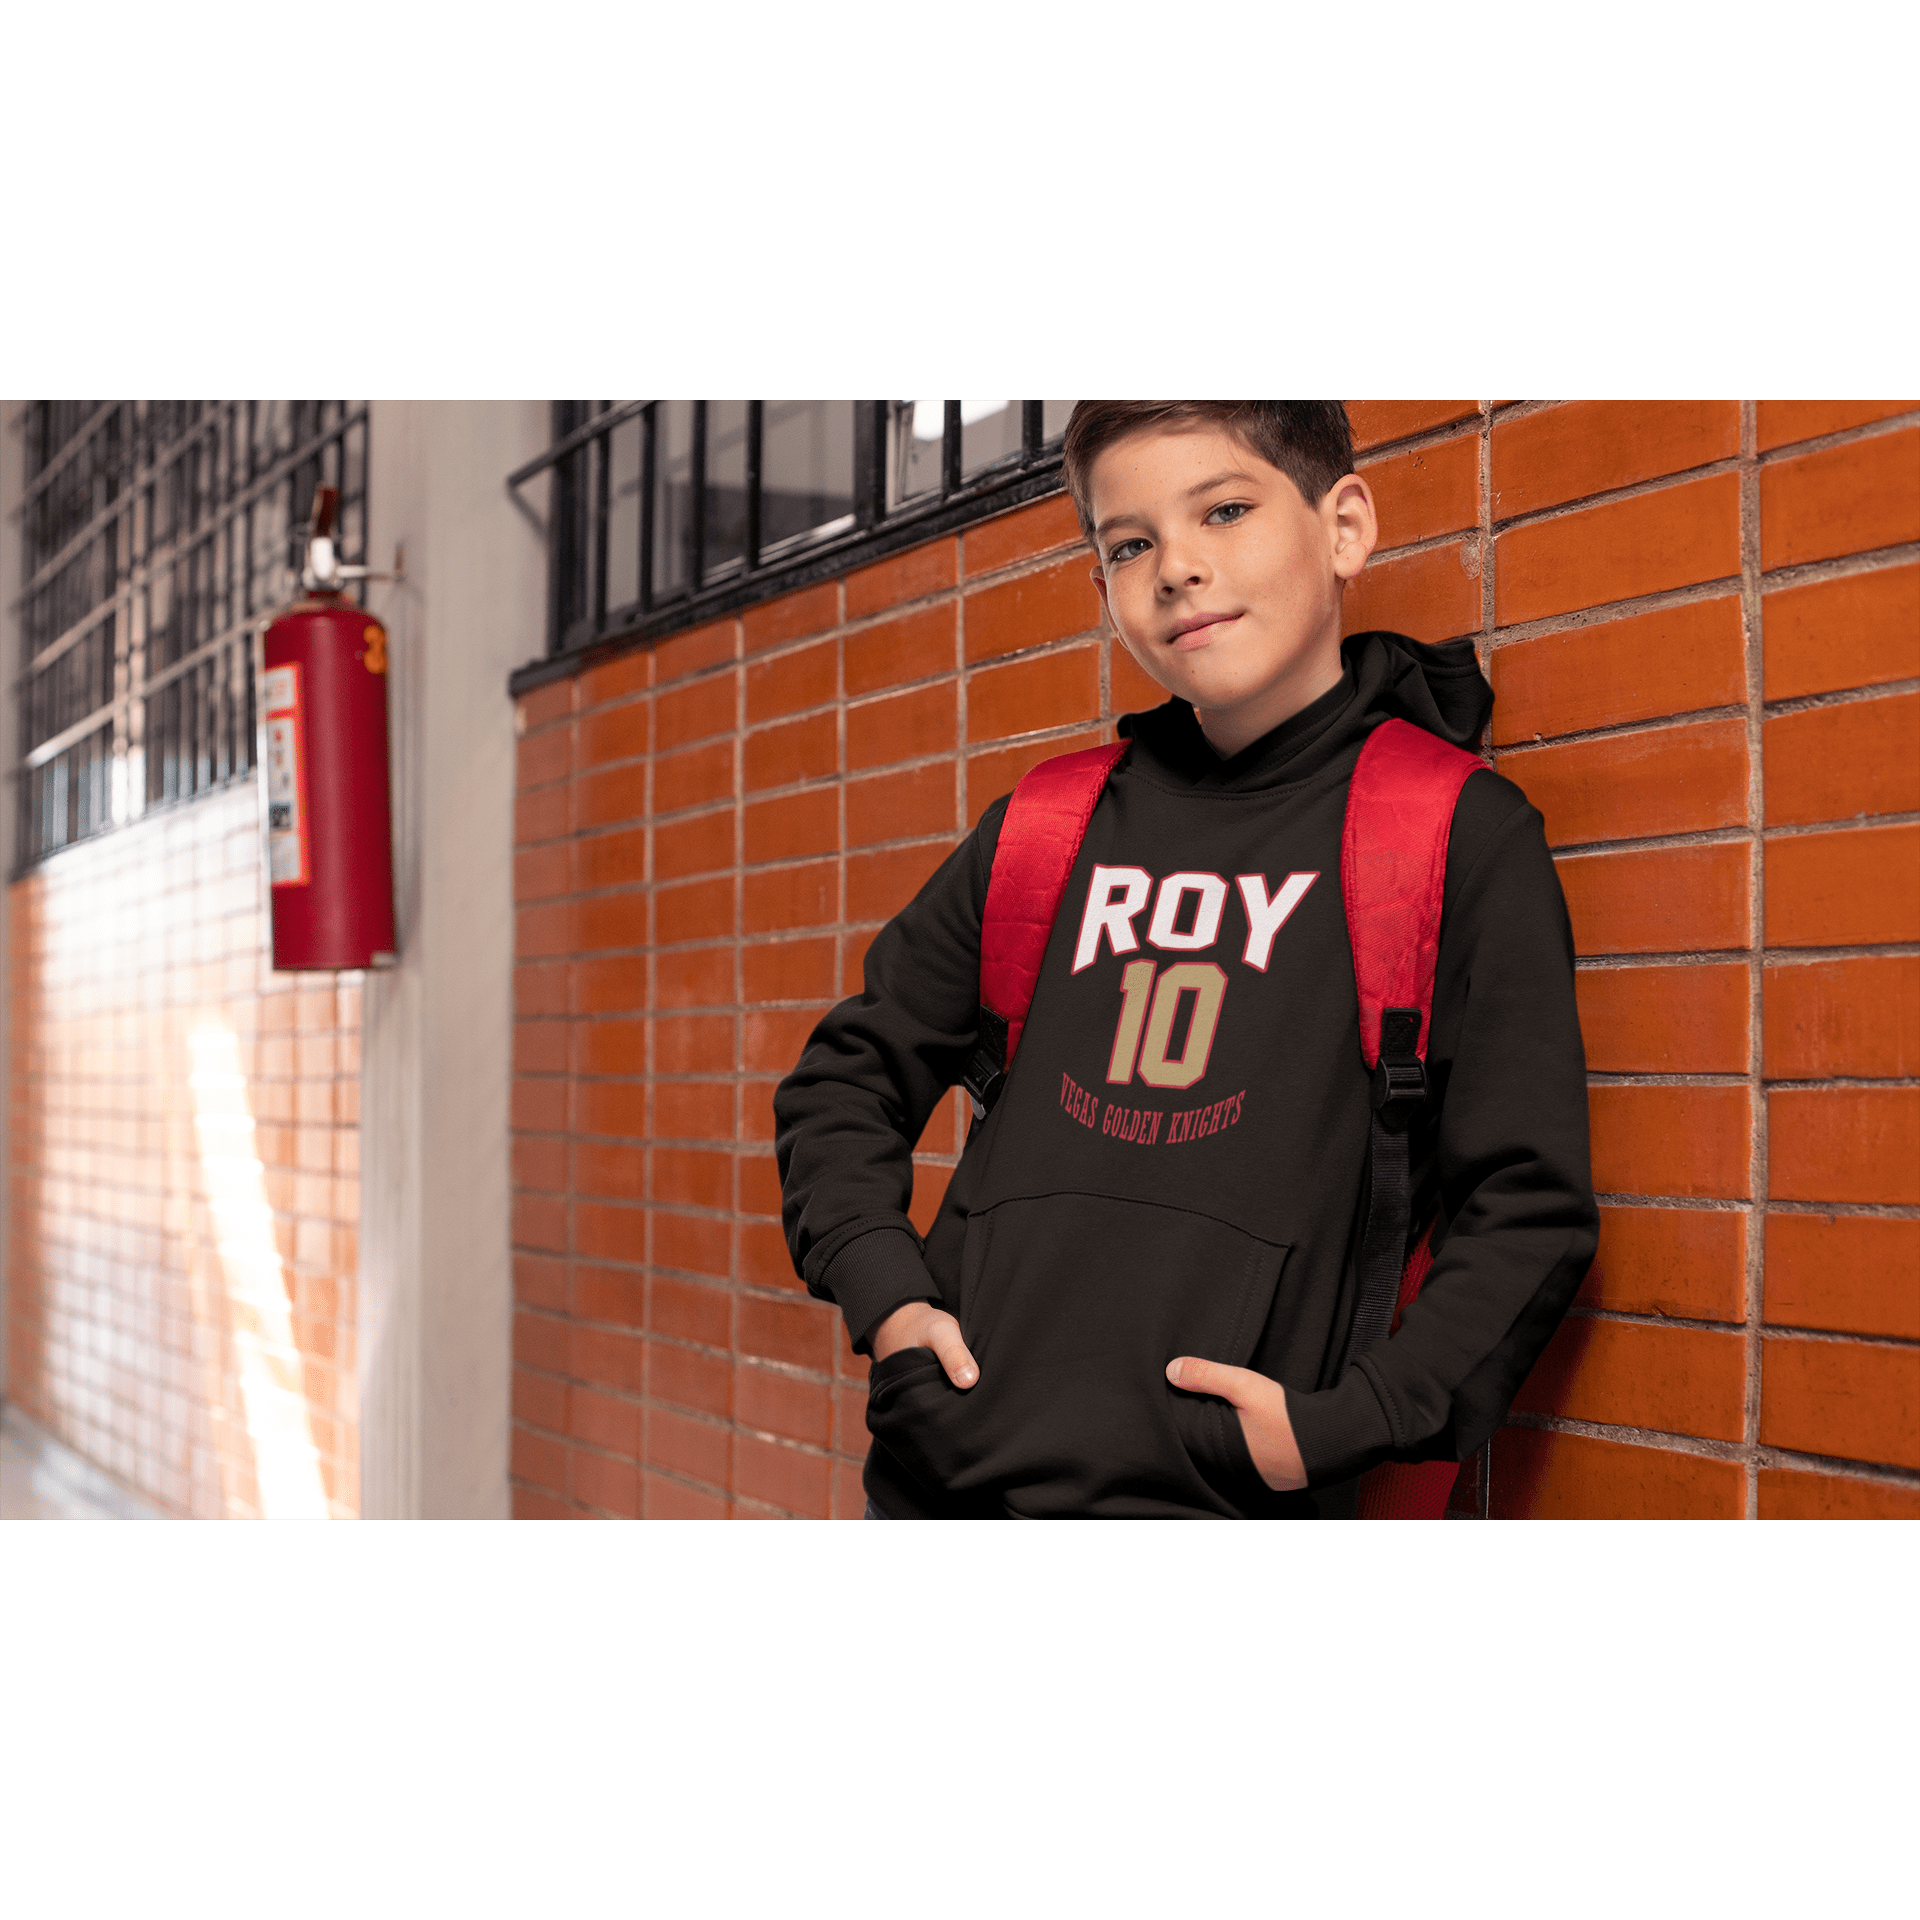 Kids clothes Roy 10 Vegas Golden Knights Retro Youth Hooded Sweatshirt